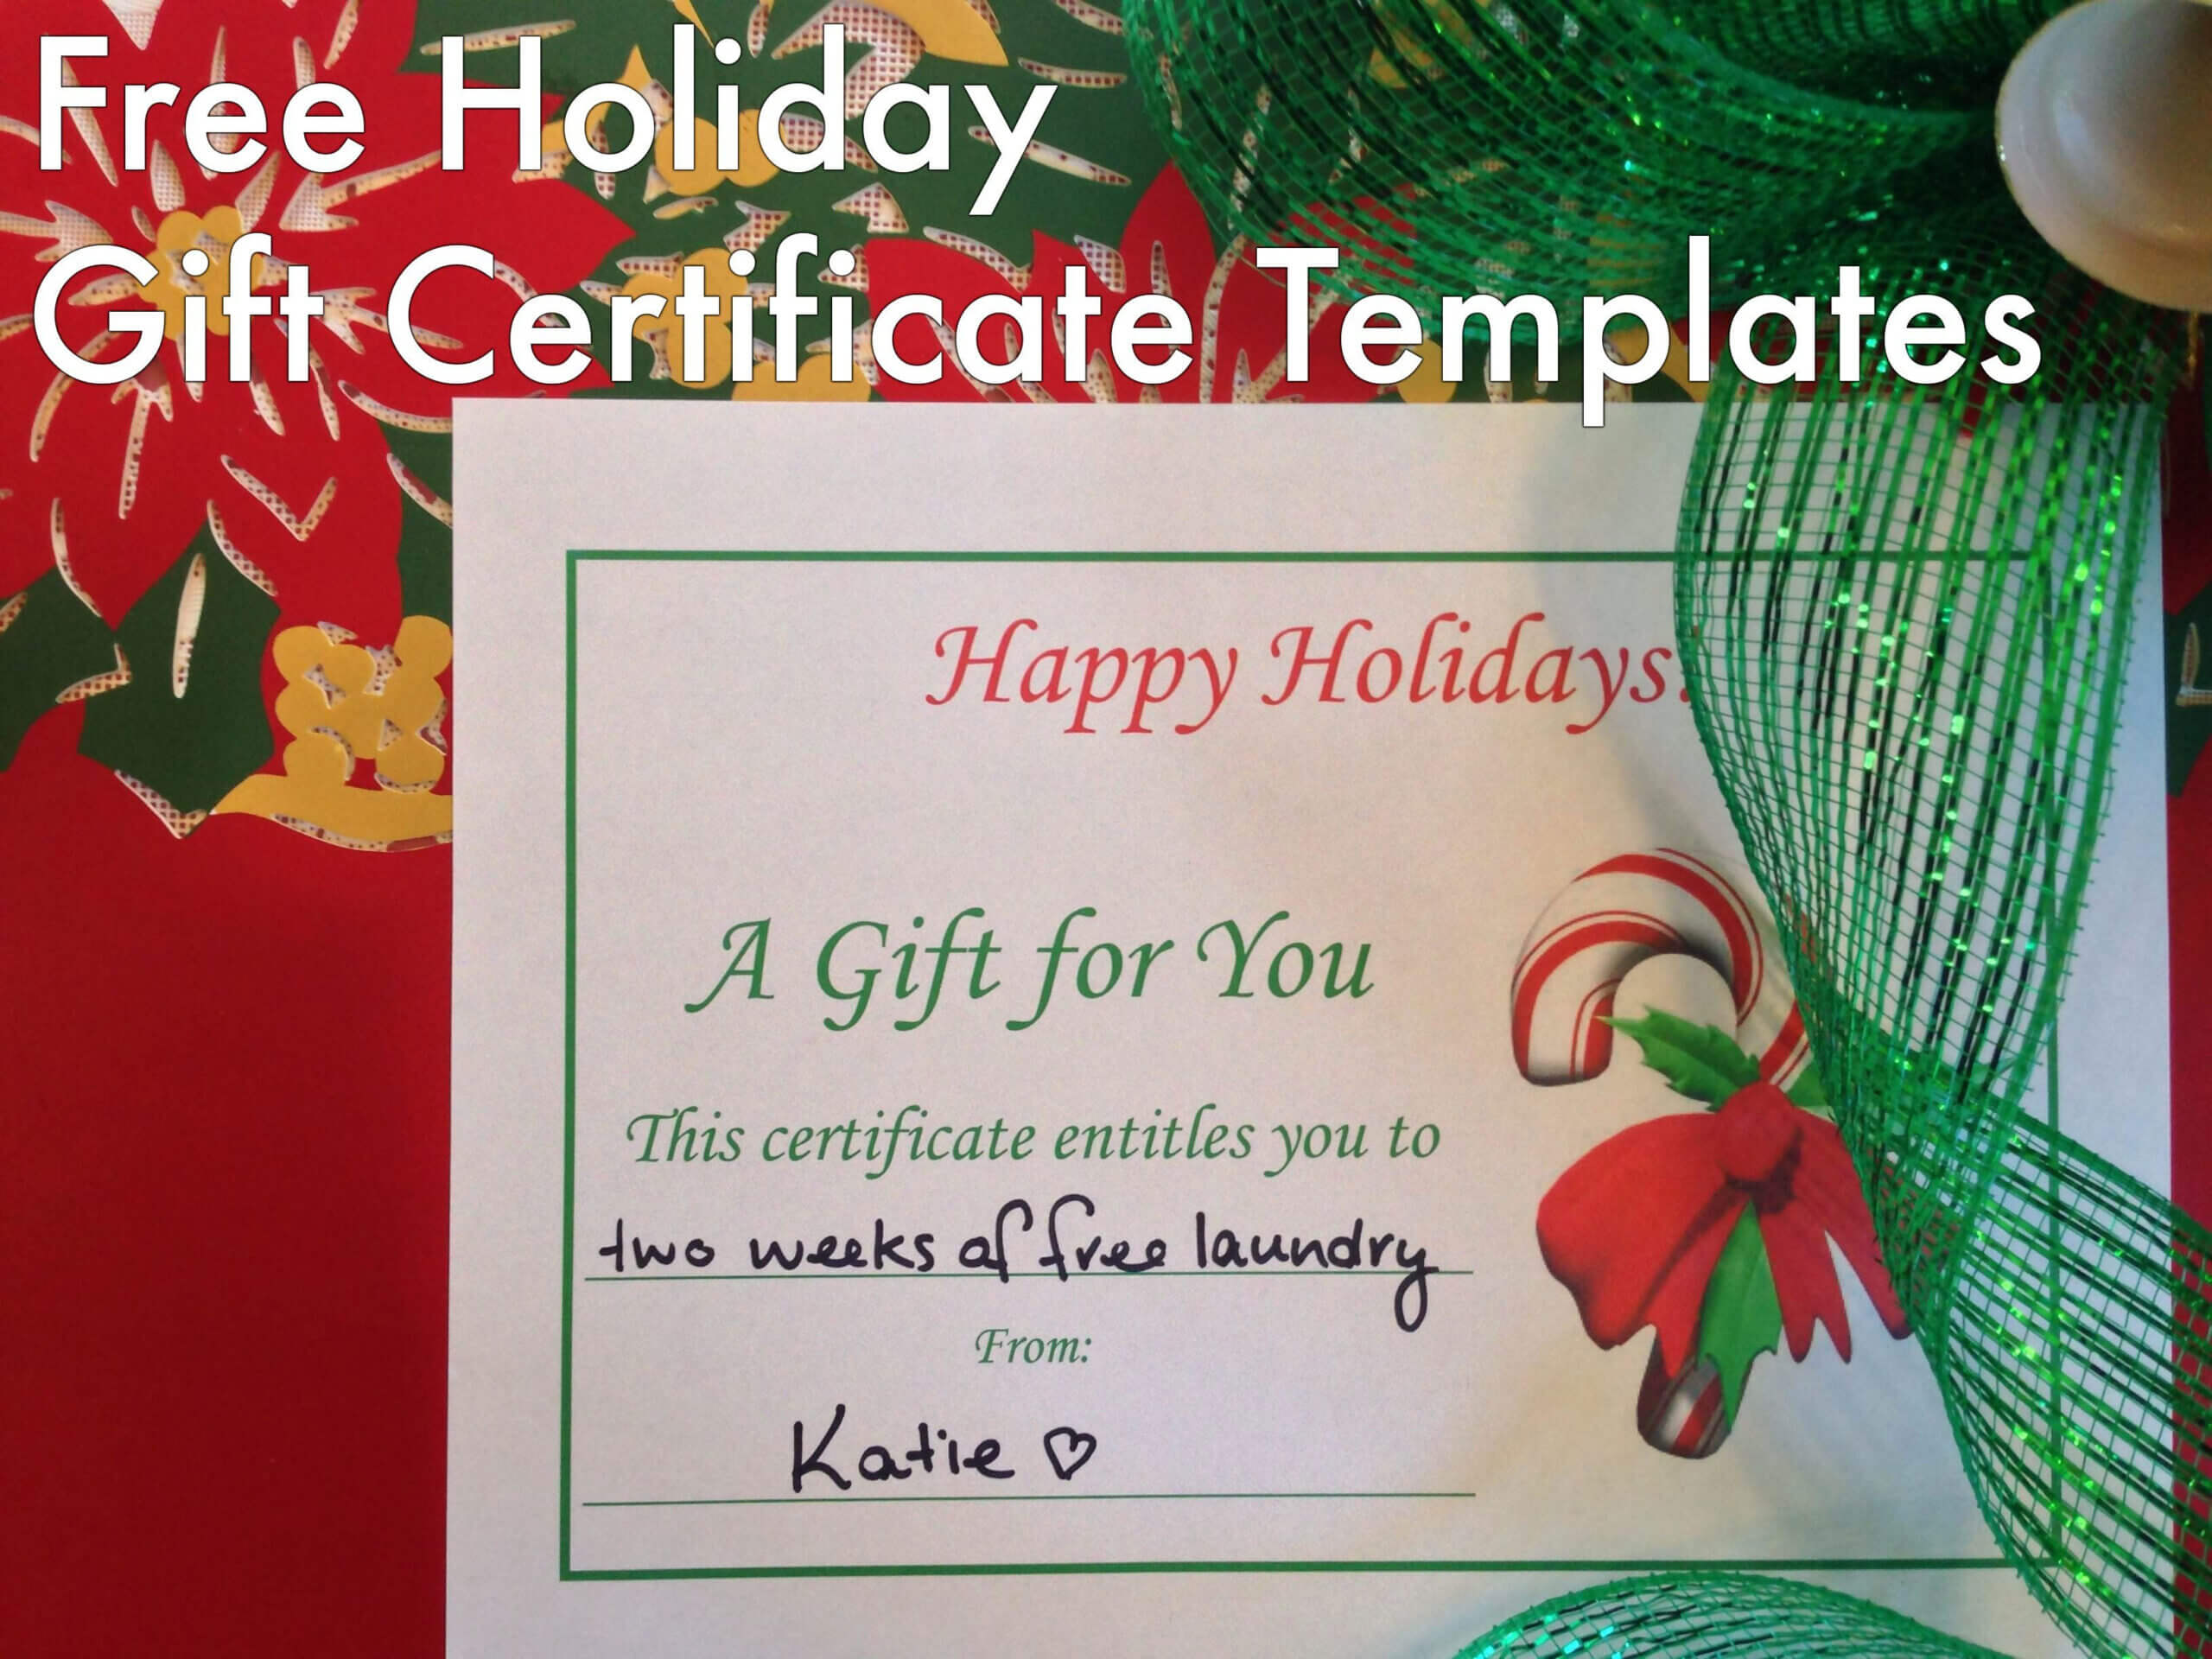 Free Holiday Gift Certificates Templates To Print | Tis The In Homemade Christmas Gift Certificates Templates